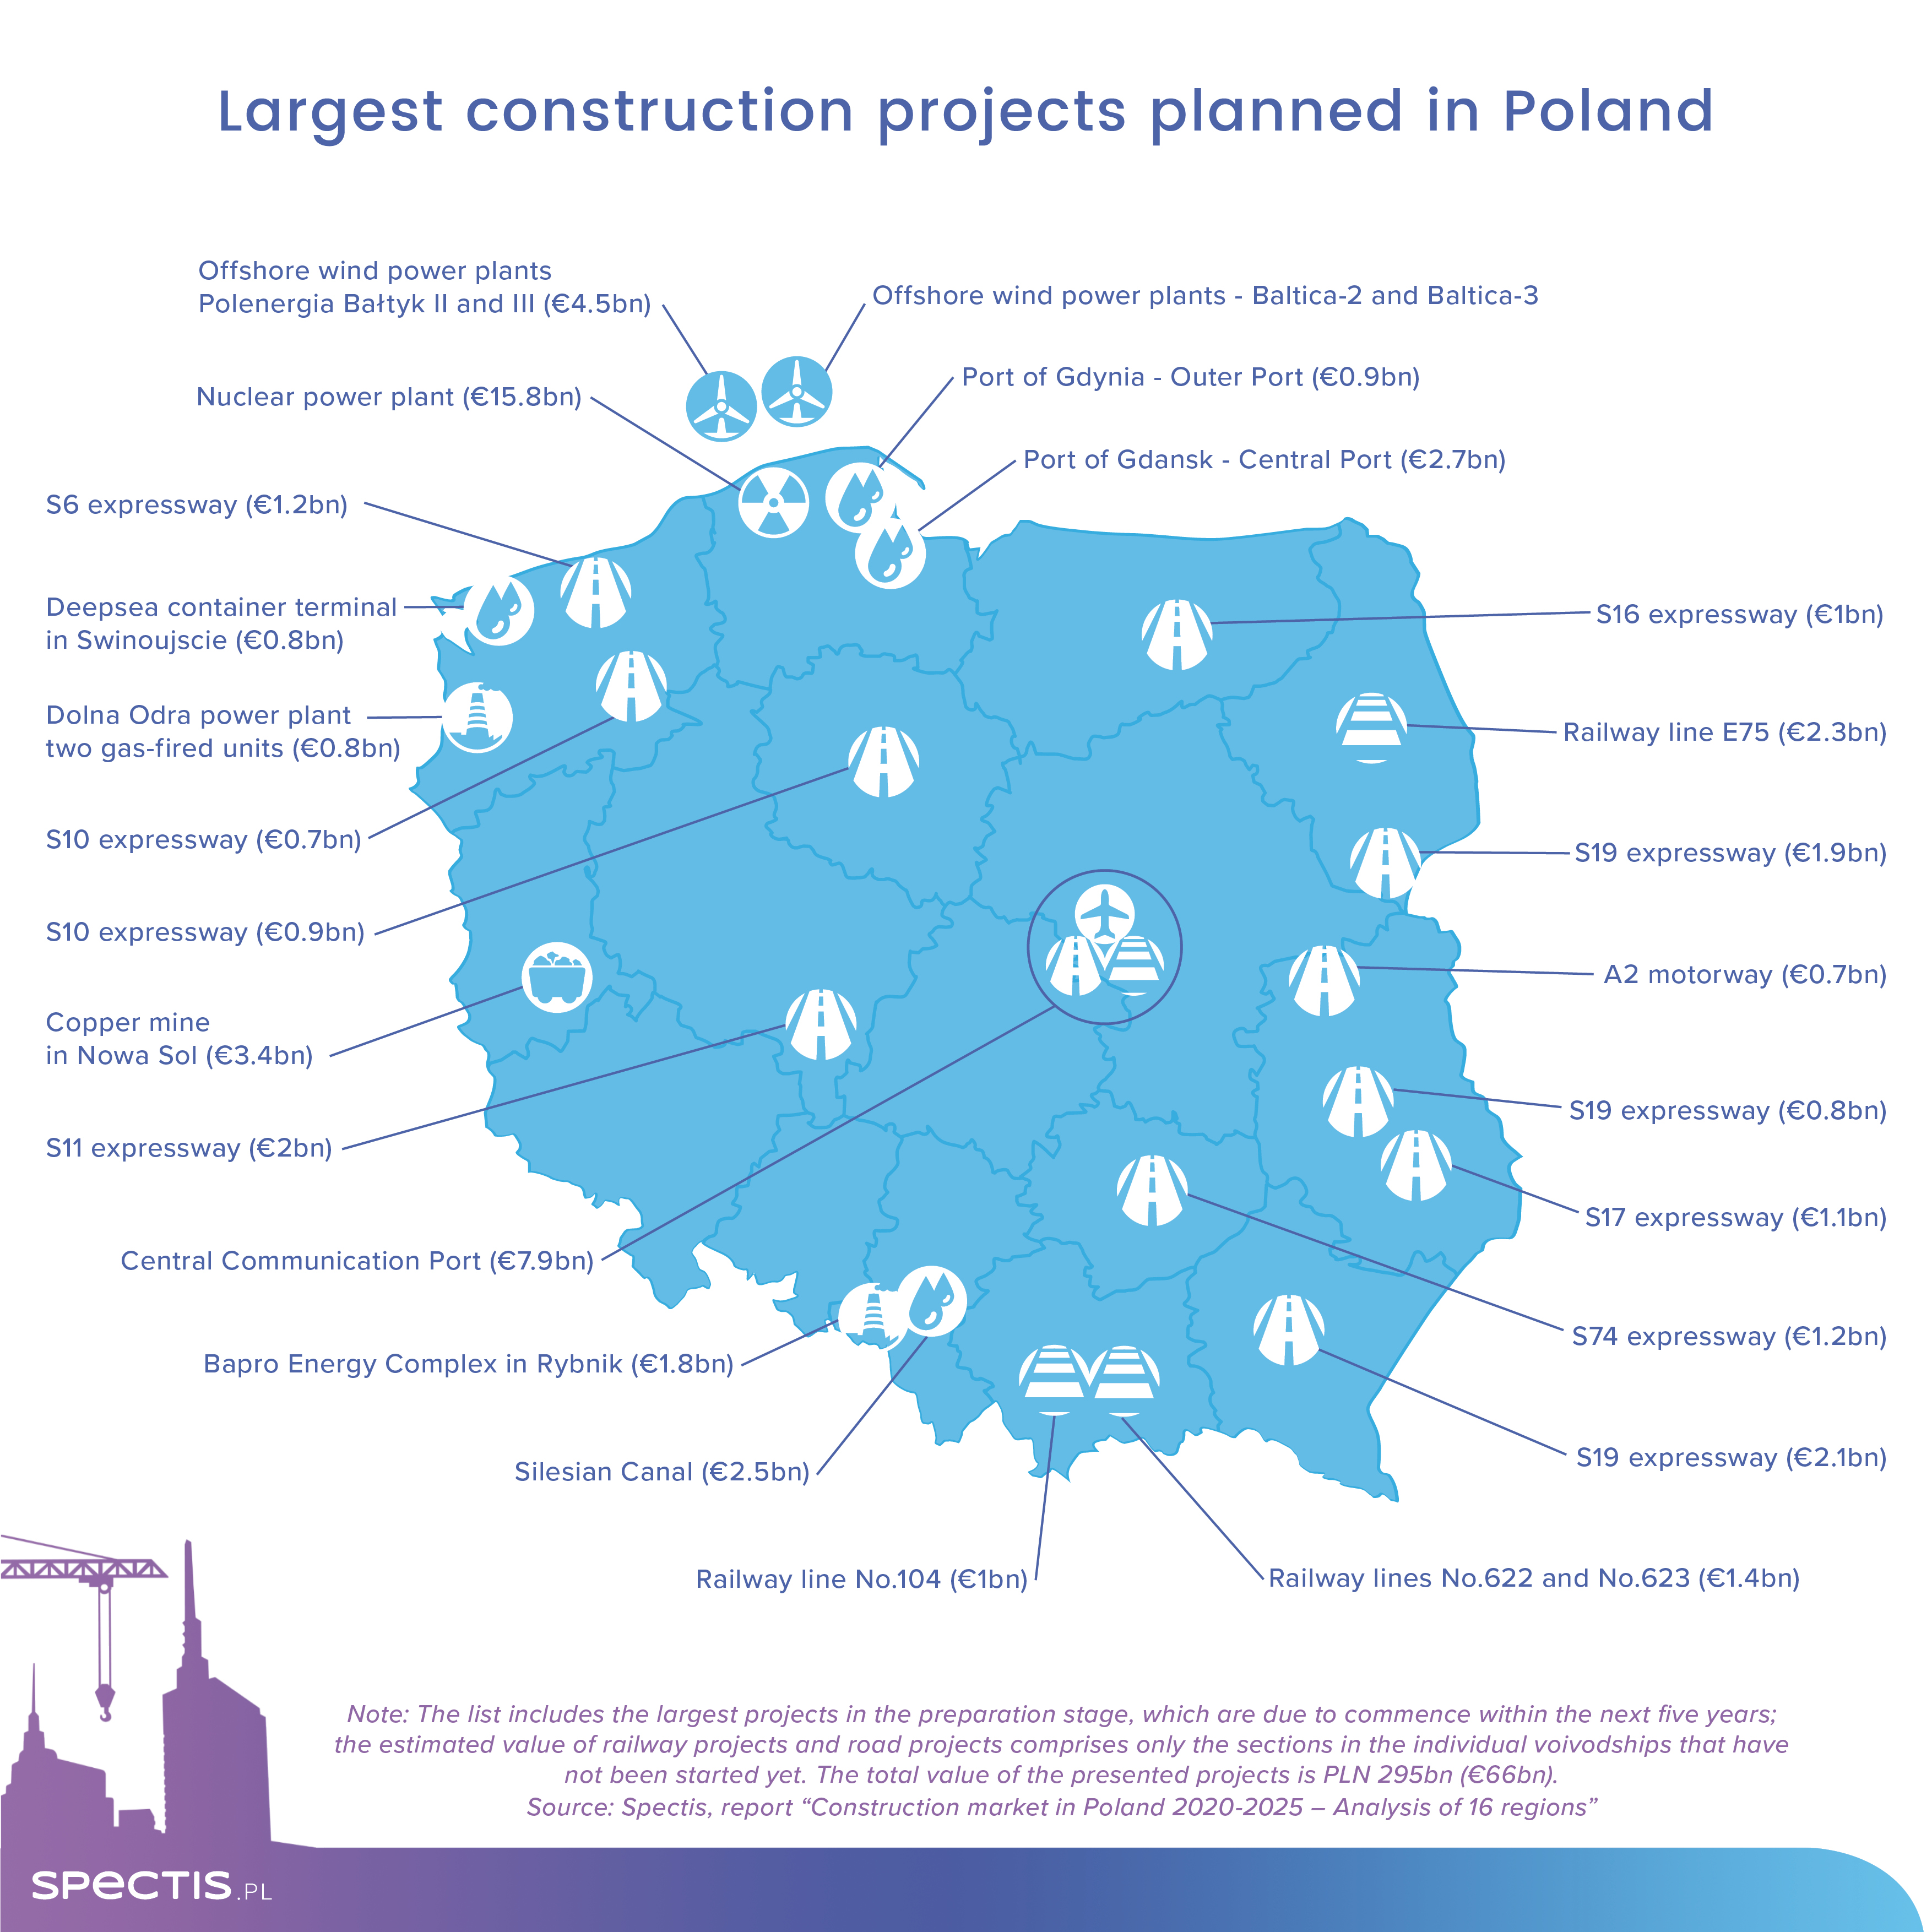 €67bn for implementation of 25 construction mega-projects in Poland